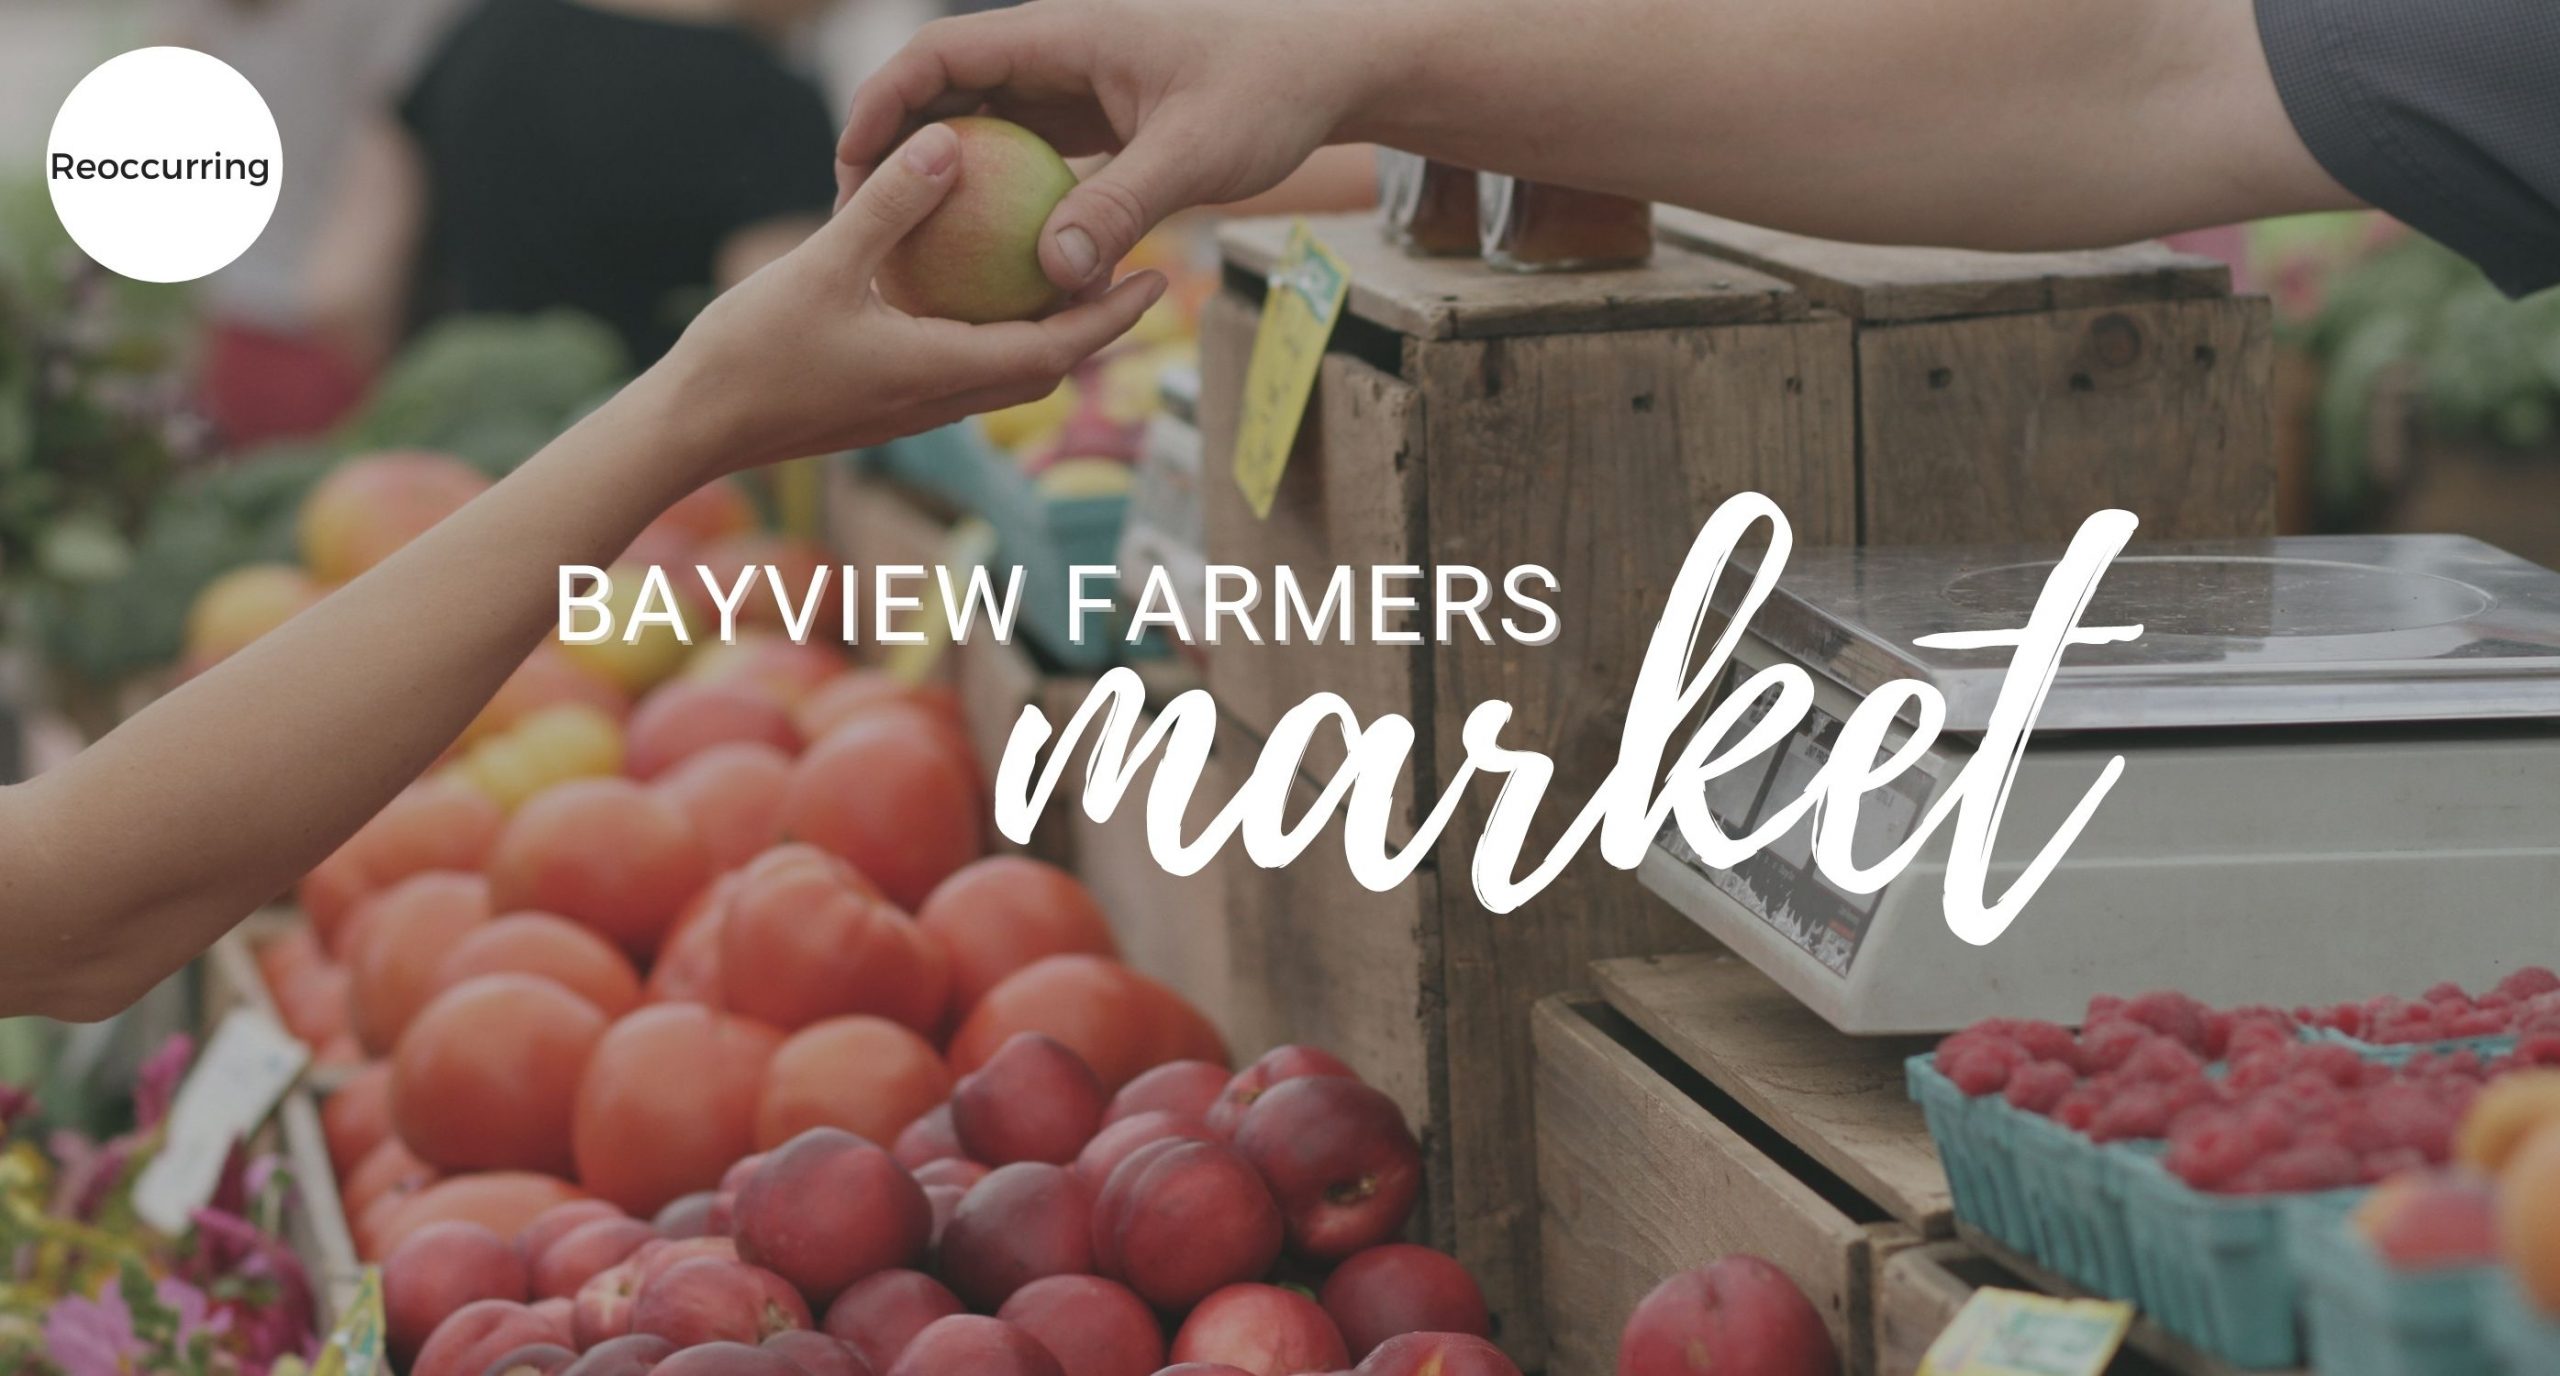 April Events, Bayview Farmers Market, Whidbey Island, Langley, things to do, local events, Whidbey Island Living